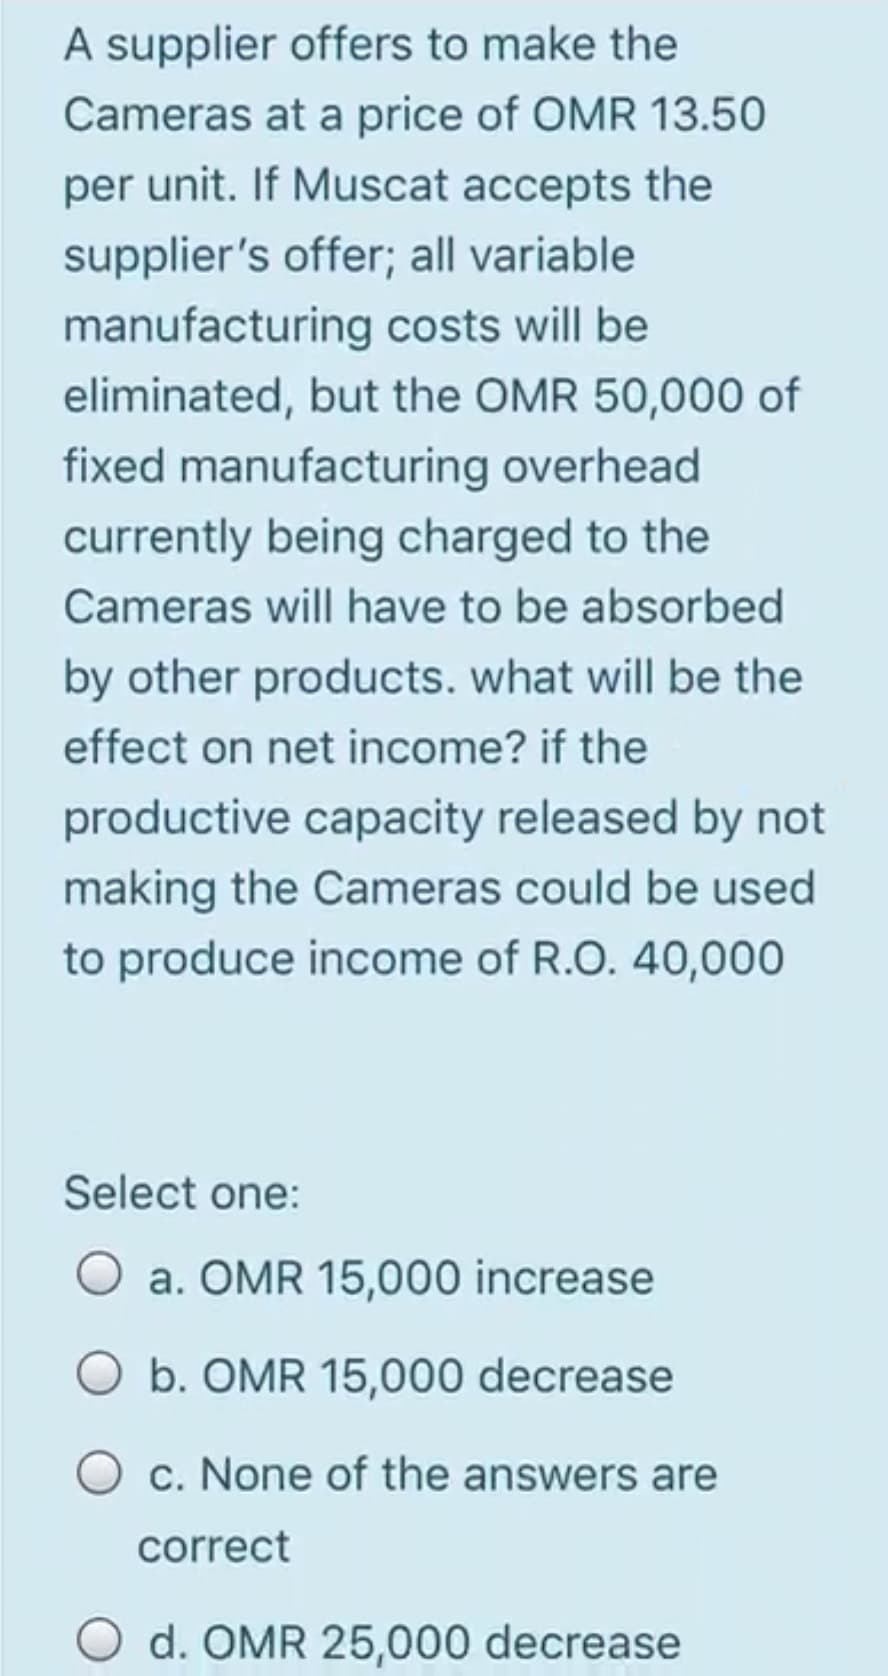 A supplier offers to make the
Cameras at a price of OMR 13.50
per unit. If Muscat accepts the
supplier's offer; all variable
manufacturing costs will be
eliminated, but the OMR 50,000 of
fixed manufacturing overhead
currently being charged to the
Cameras will have to be absorbed
by other products. what will be the
effect on net income? if the
productive capacity released by not
making the Cameras could be used
to produce income of R.O. 40,000
Select one:
a. OMR 15,000 increase
b. OMR 15,000 decrease
O c. None of the answers are
correct
O d. OMR 25,000 decrease
